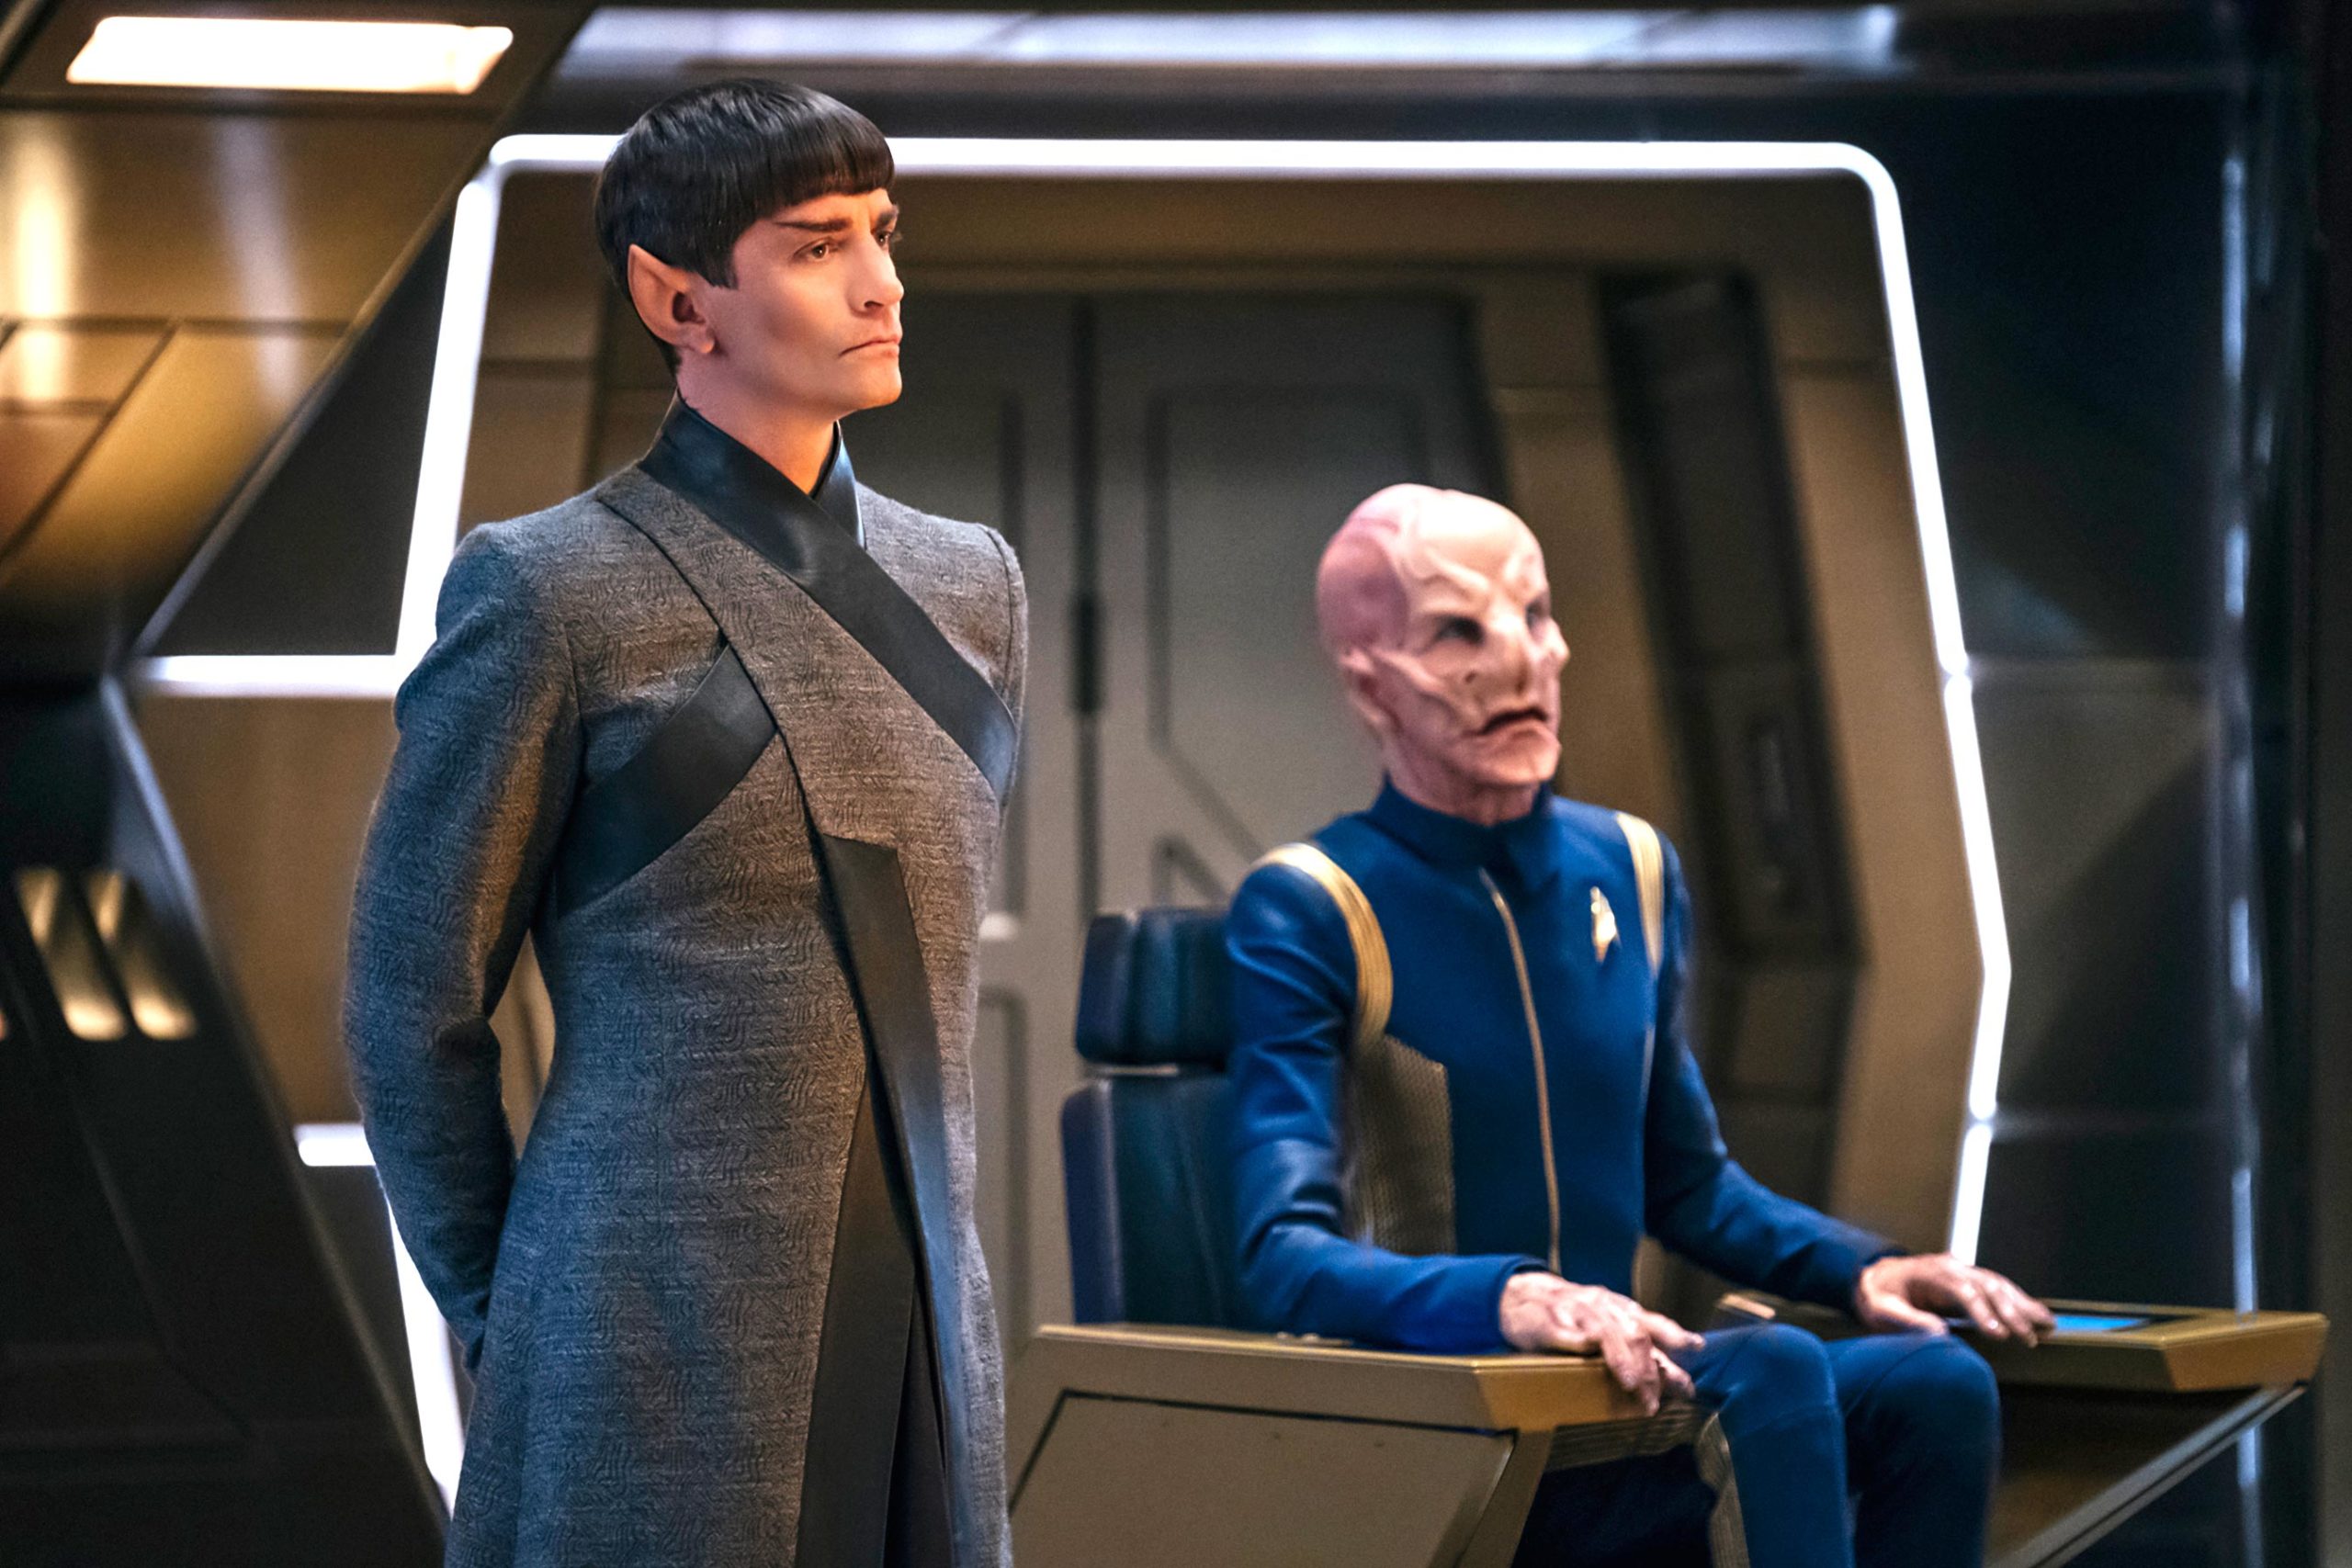 Star Trek: Discovery Wraps Up A Wildly Uneven First Season With A Wildly Uneven Finale